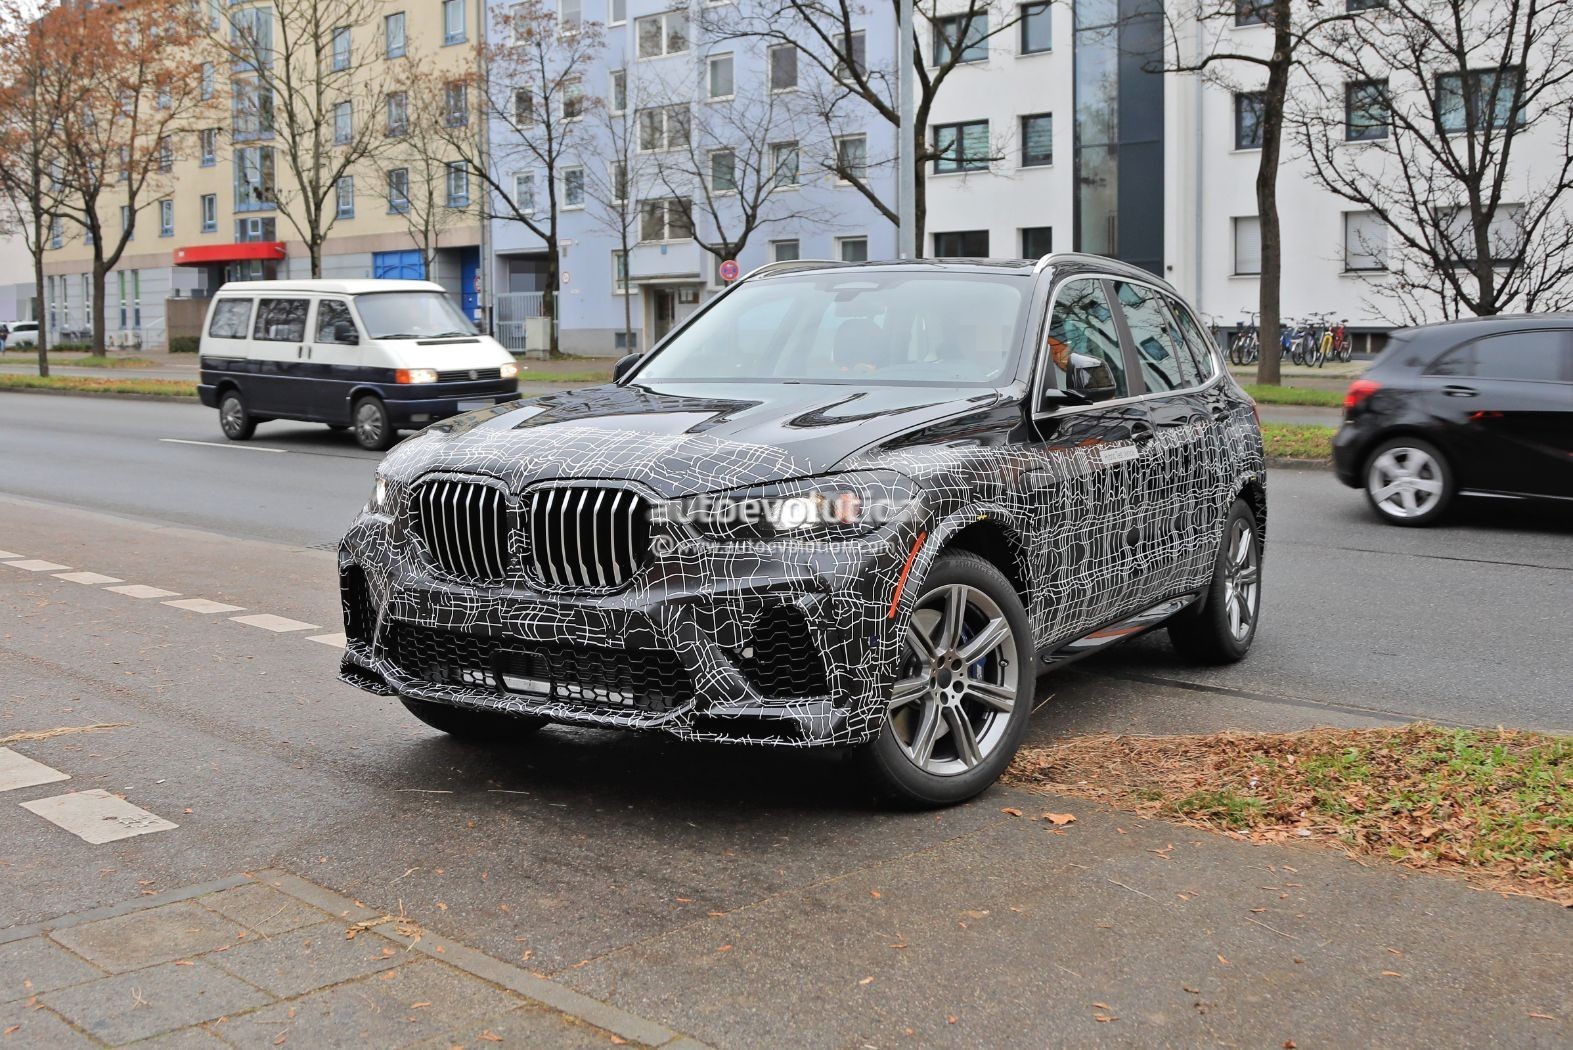 2022 BMW X5 LCI Plug-in Prototype Caught During Testing Center Delivery